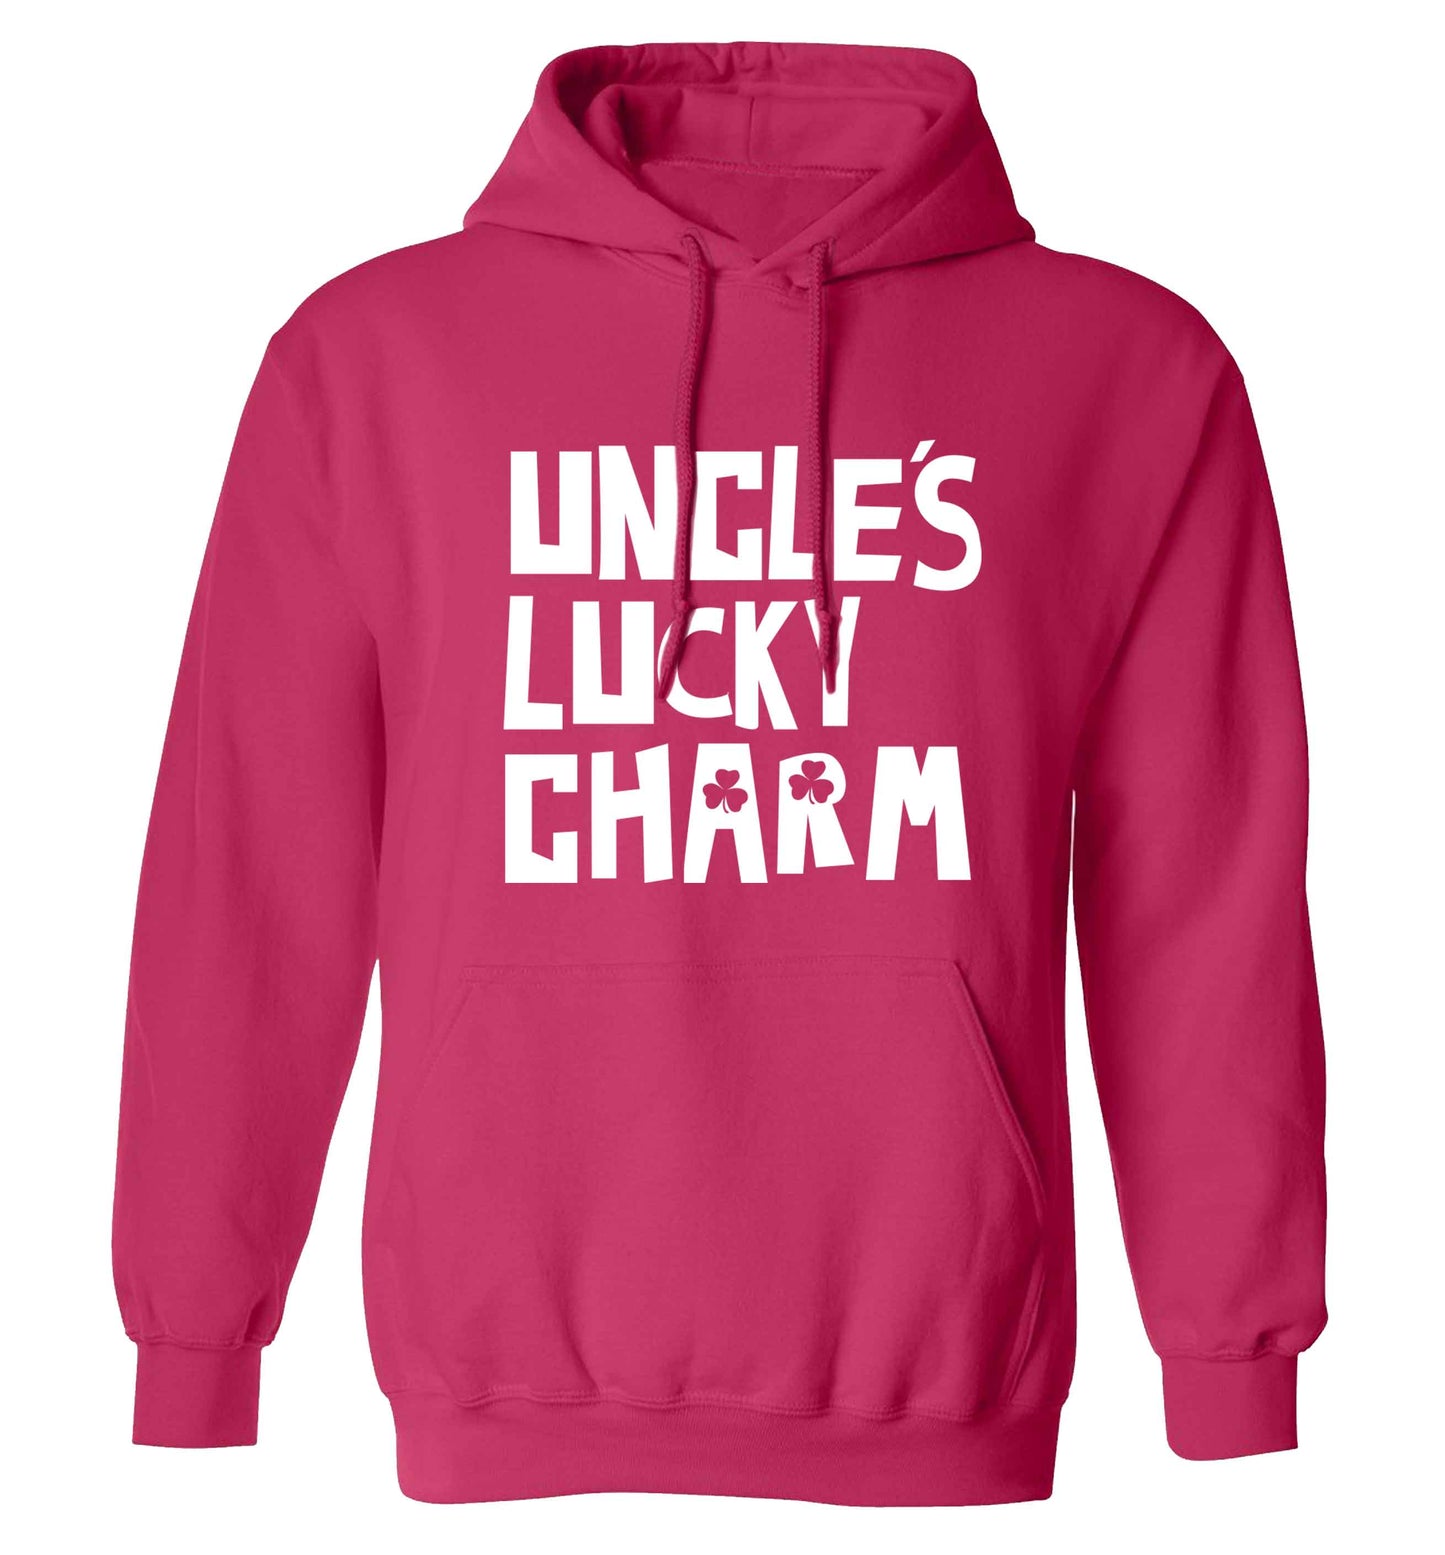 Uncles lucky charm adults unisex pink hoodie 2XL